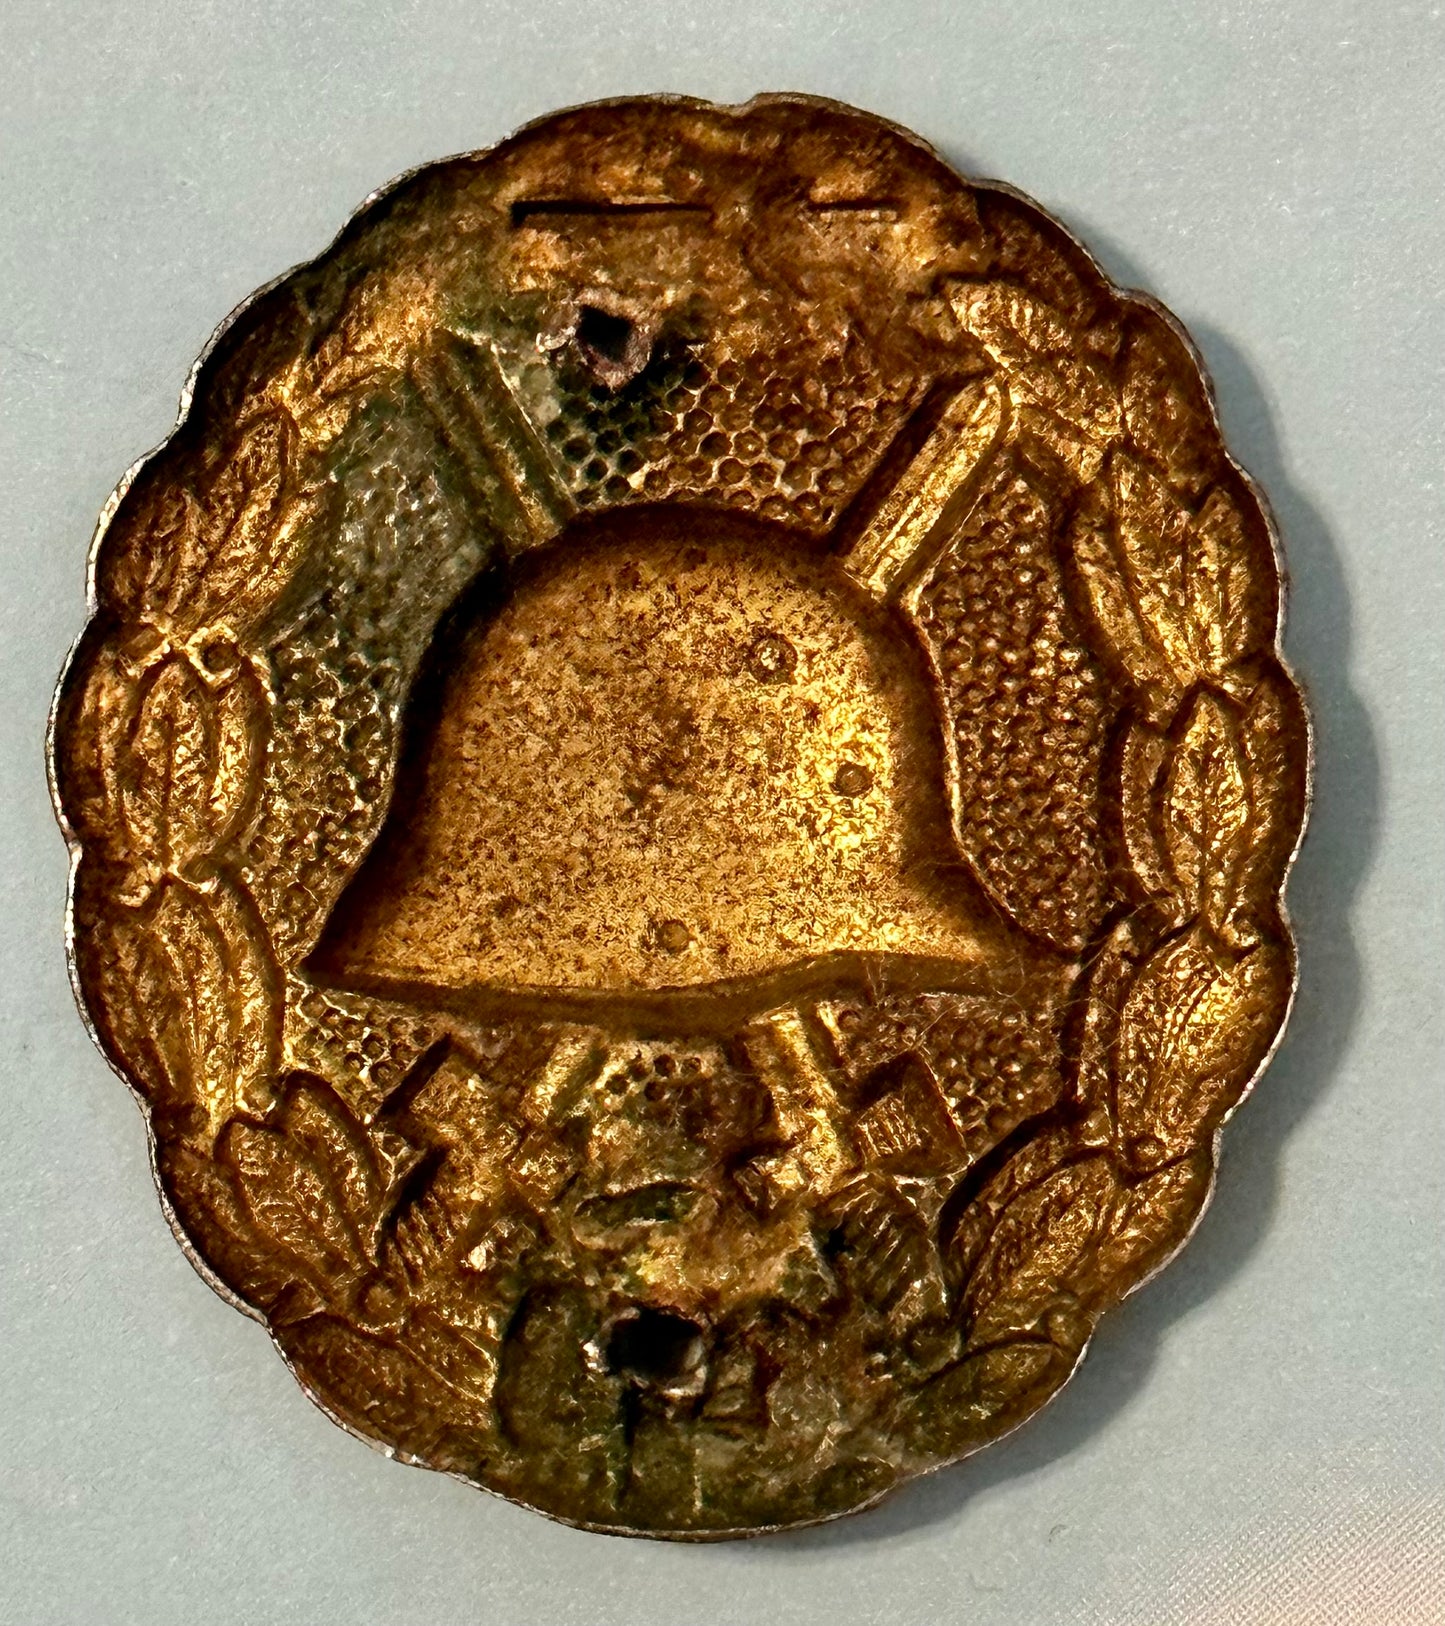 German Army Wound Badge in Gold - Derrittmeister Militaria Group